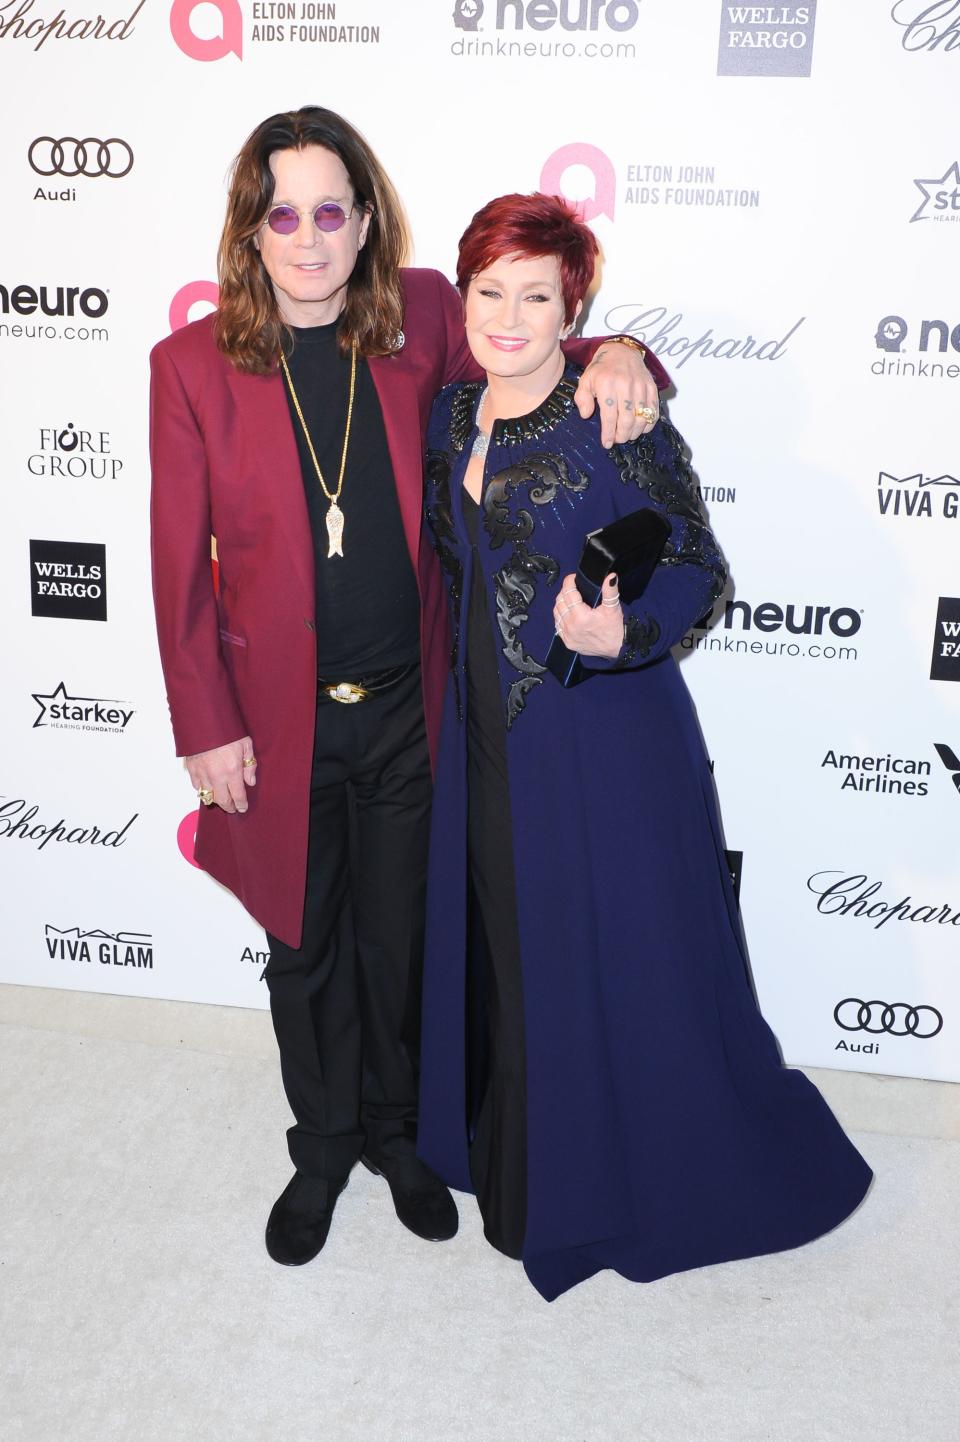 Ozzy Osbourne, Sharon Osbourne at arrivals for 2015 Elton John AIDS Foundation Viewing Party, West Hollywood Park, Los Angeles, CA February 22, 2015. Photo By: Sara Cozolino/Everett Collection